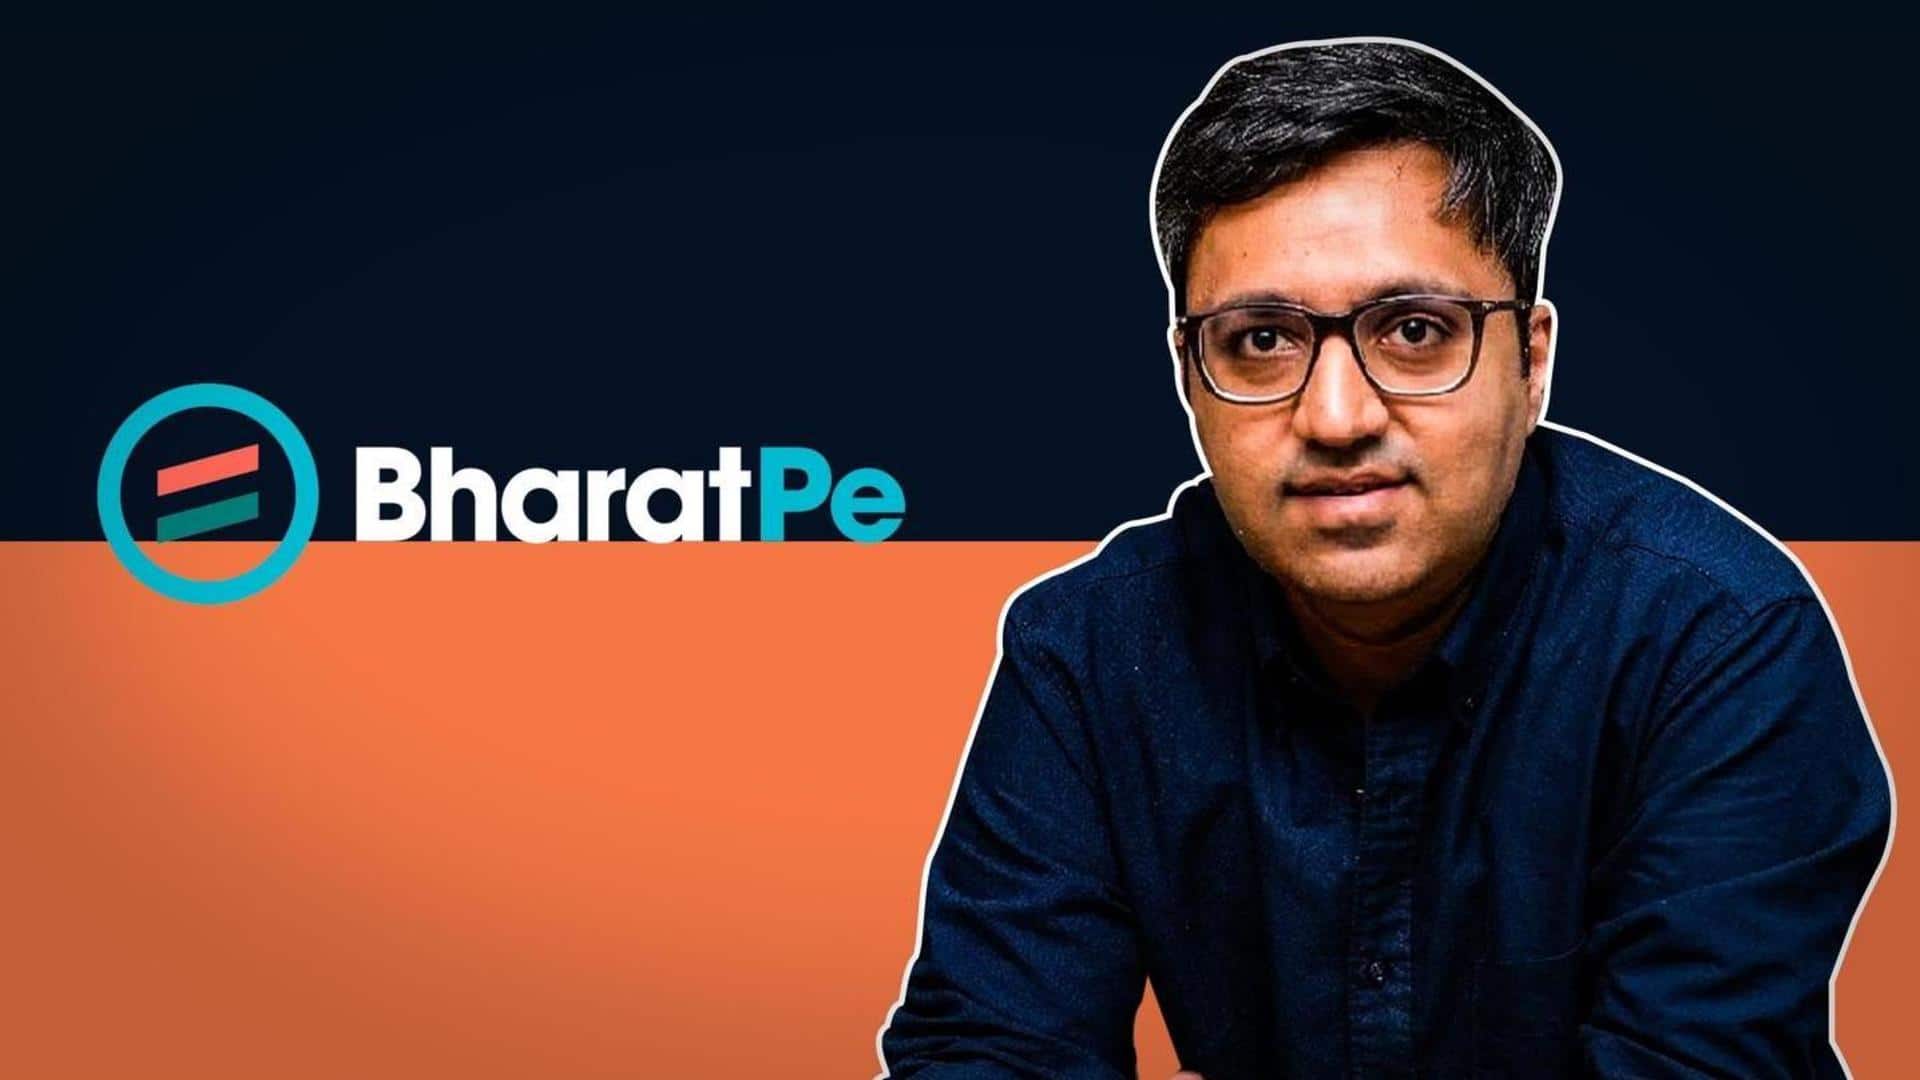 BharatPe paid founder Ashneer Grover Rs. 1.7 crore in FY22